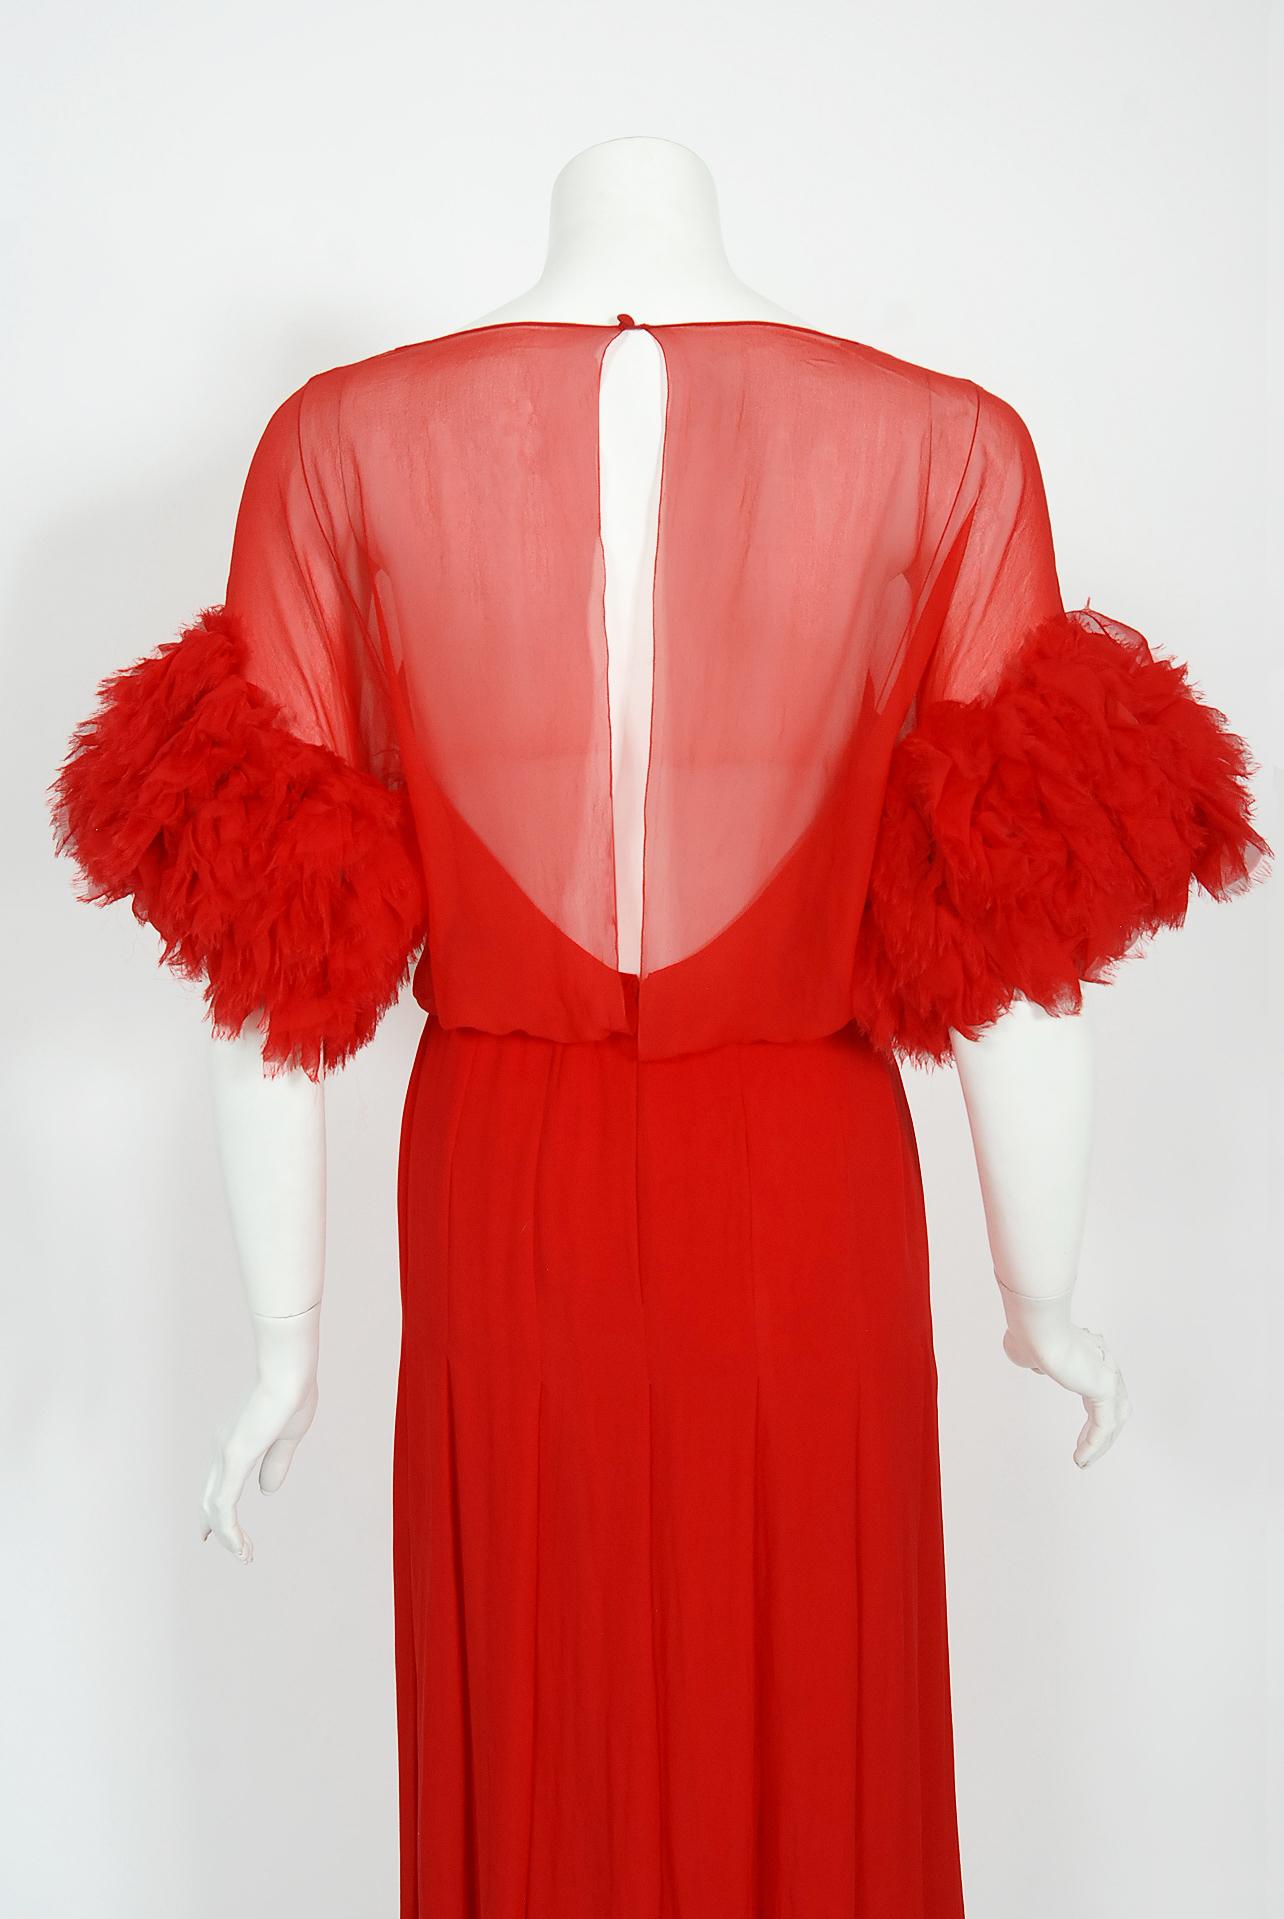 Vintage 1984 Chanel by Karl Lagerfeld Runway Red Silk Chiffon Ruffle-Sleeve Gown 7